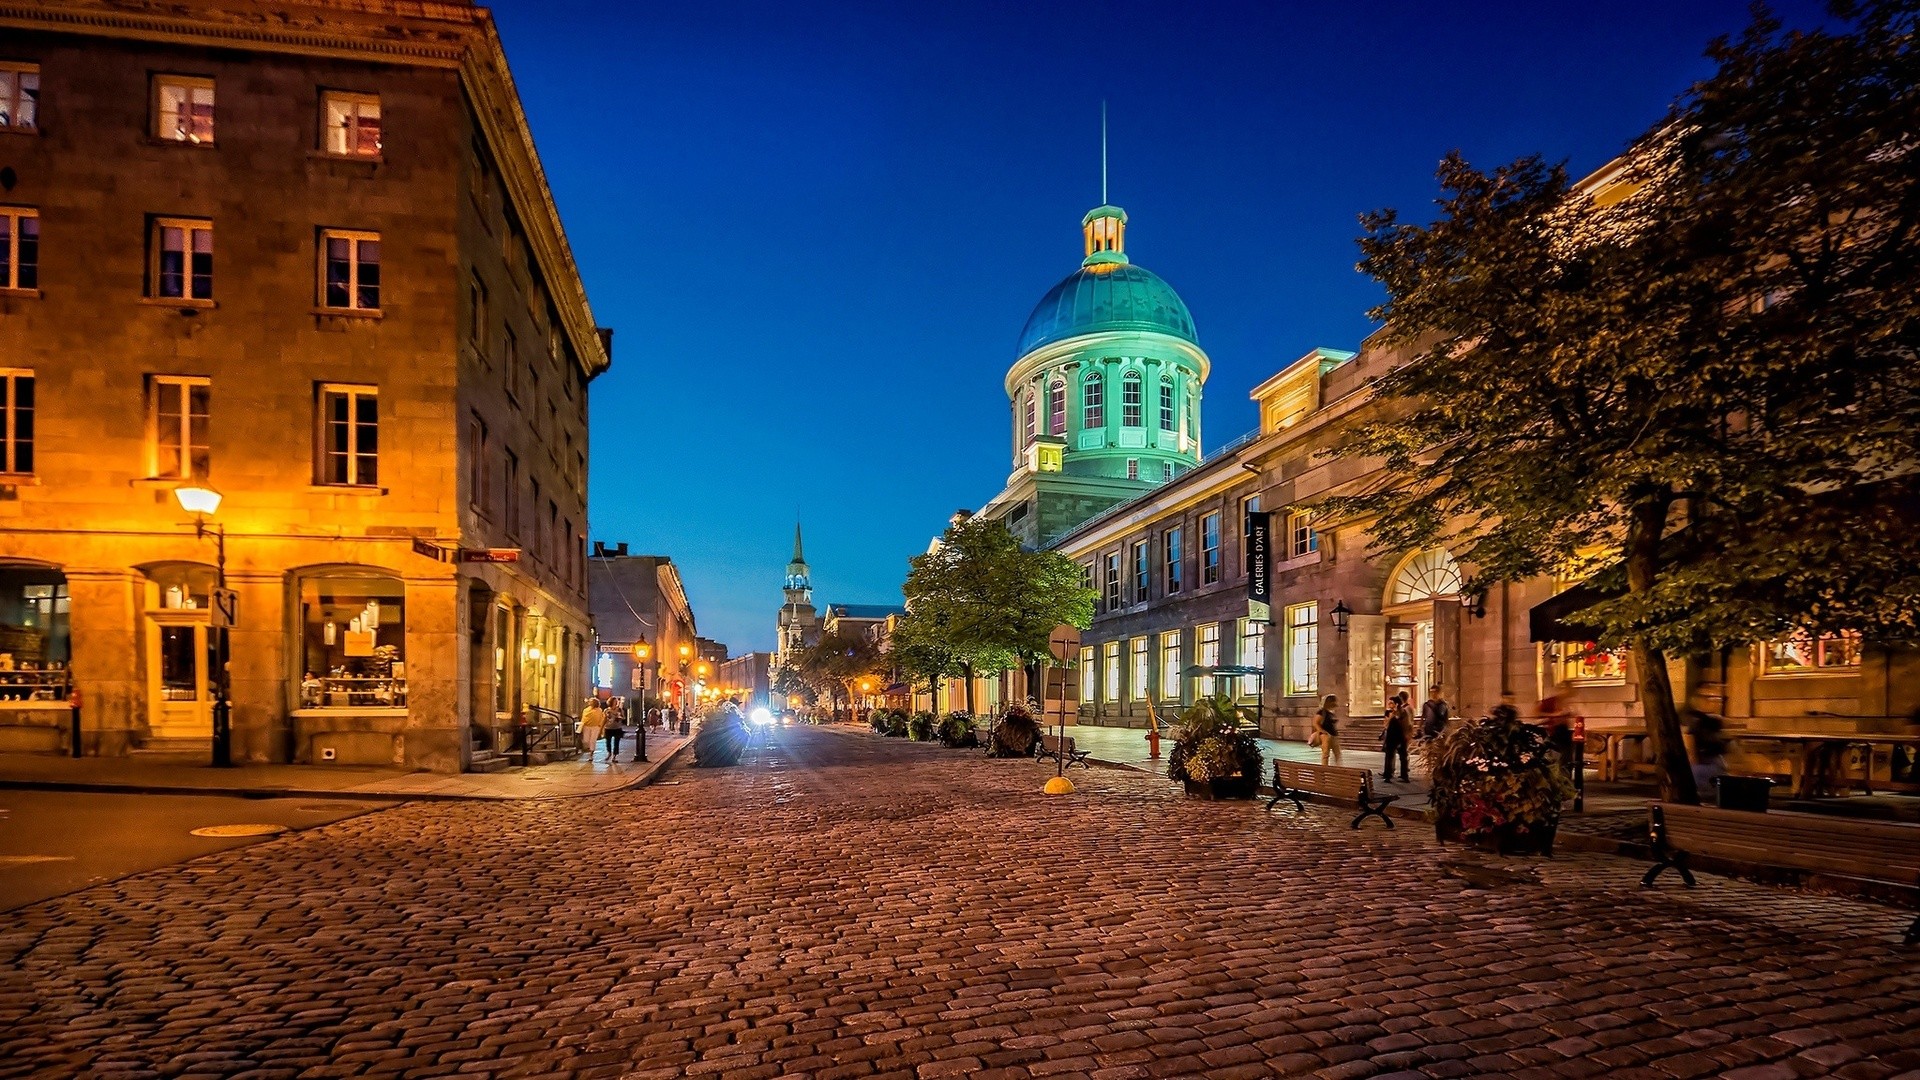 General 1920x1080 city cityscape architecture street night lights street light old building tower Montreal Quebec Canada trees people church dome long exposure bench pavements evening calm